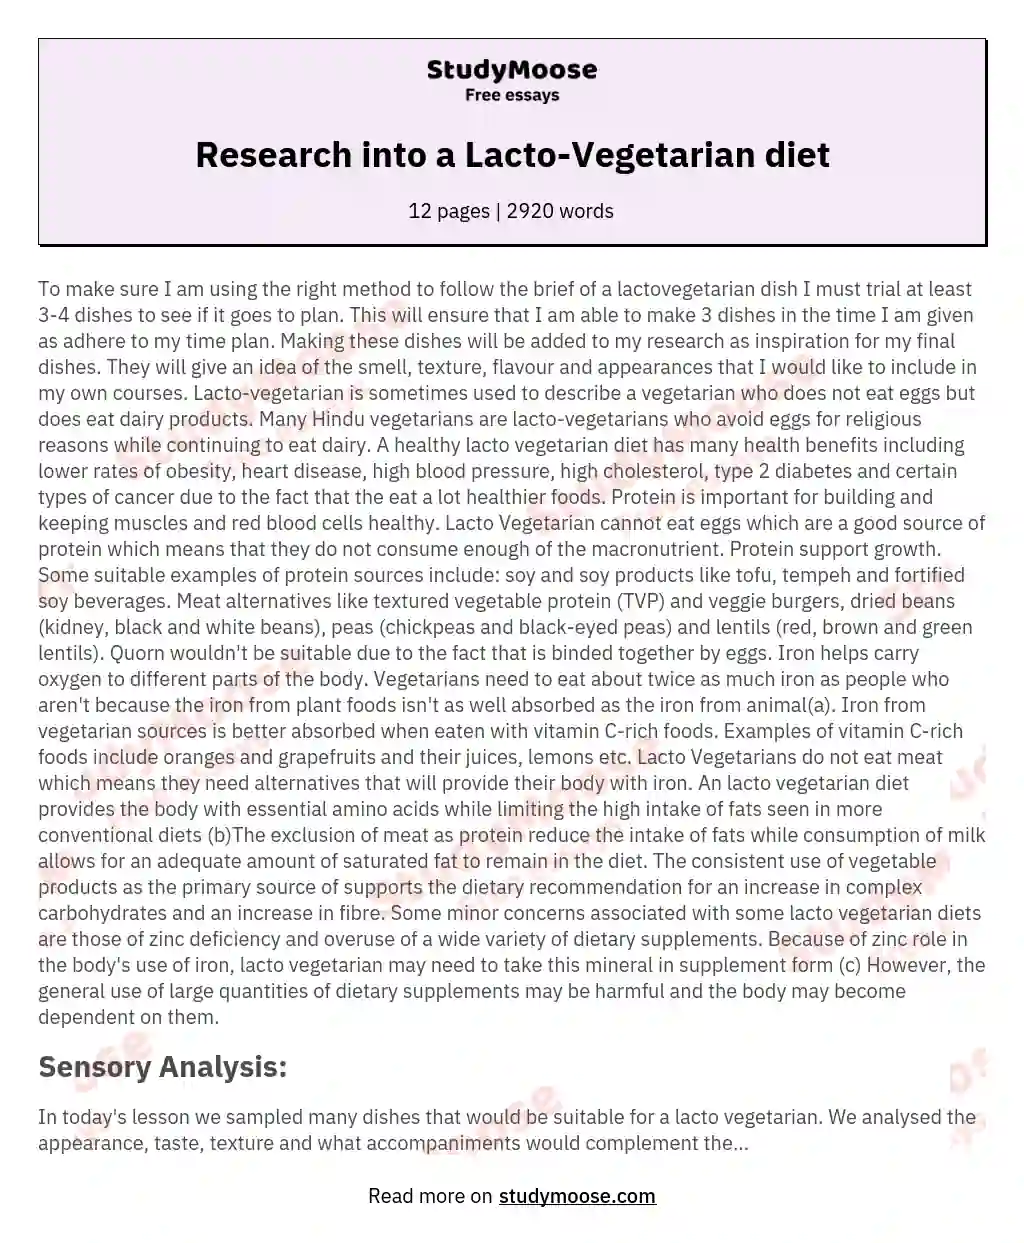 Research into a Lacto-Vegetarian diet essay